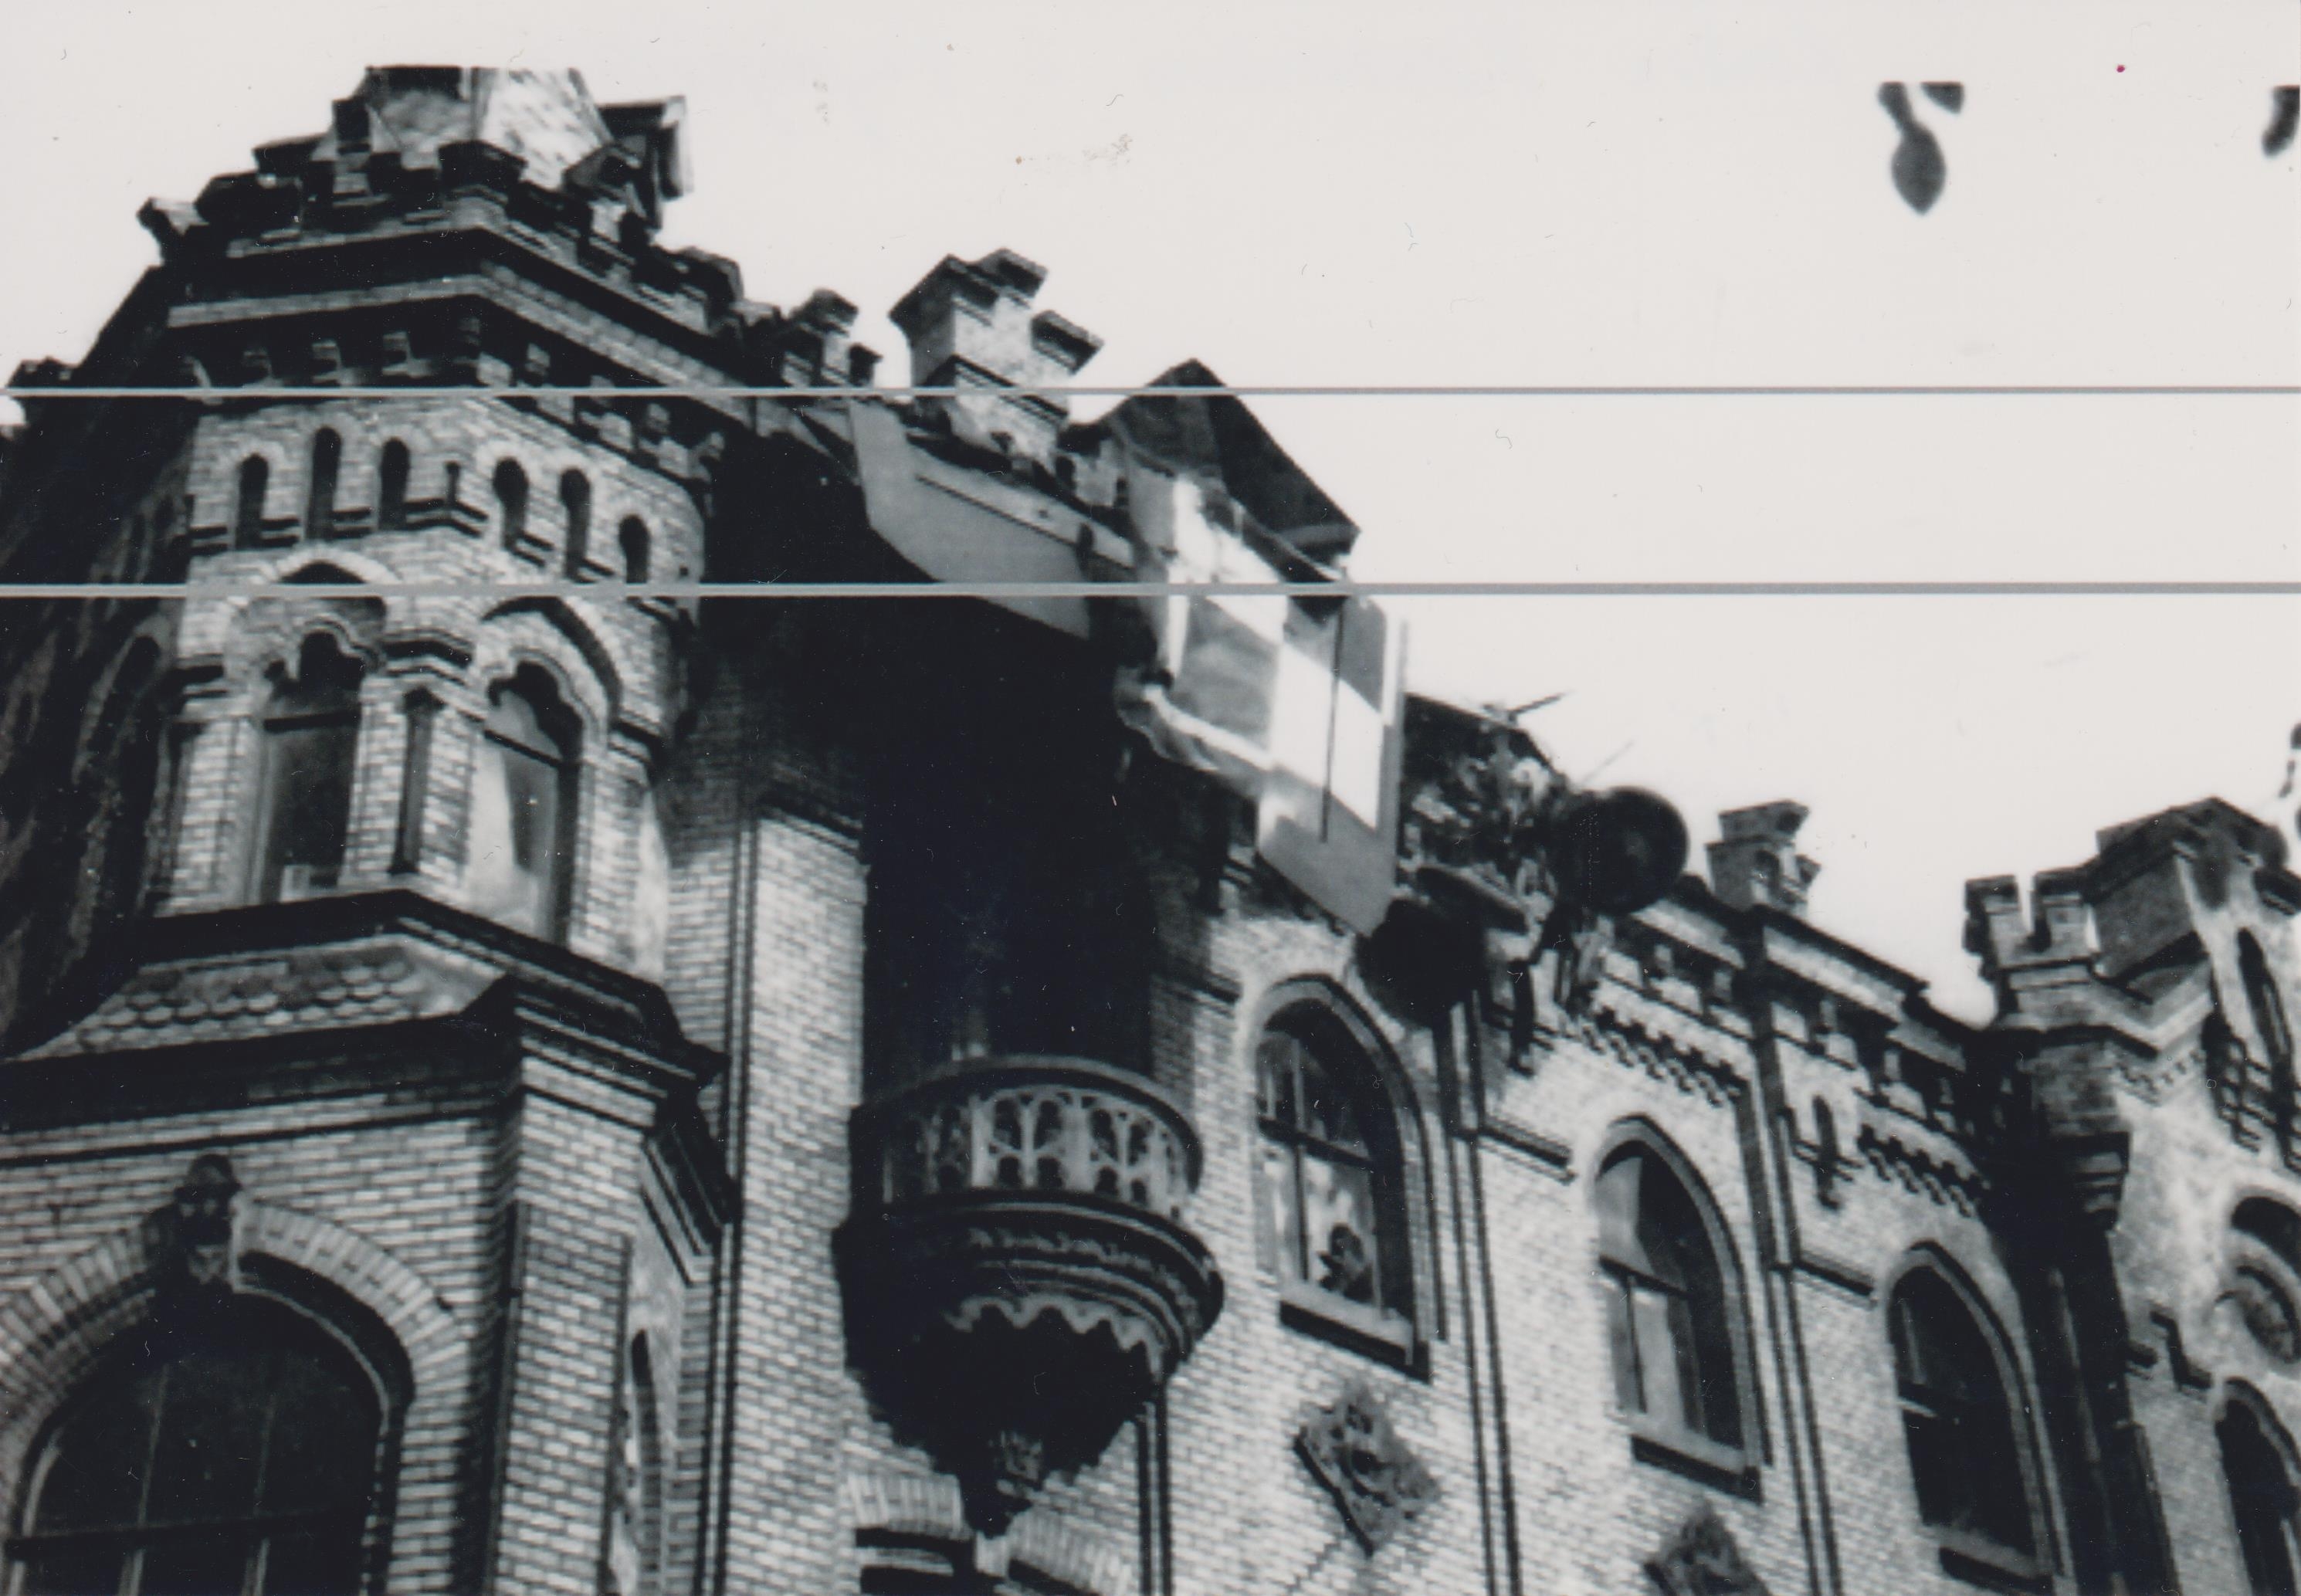 view of the tenement house after the crash in which Czeslaw Kiernowicz was killed